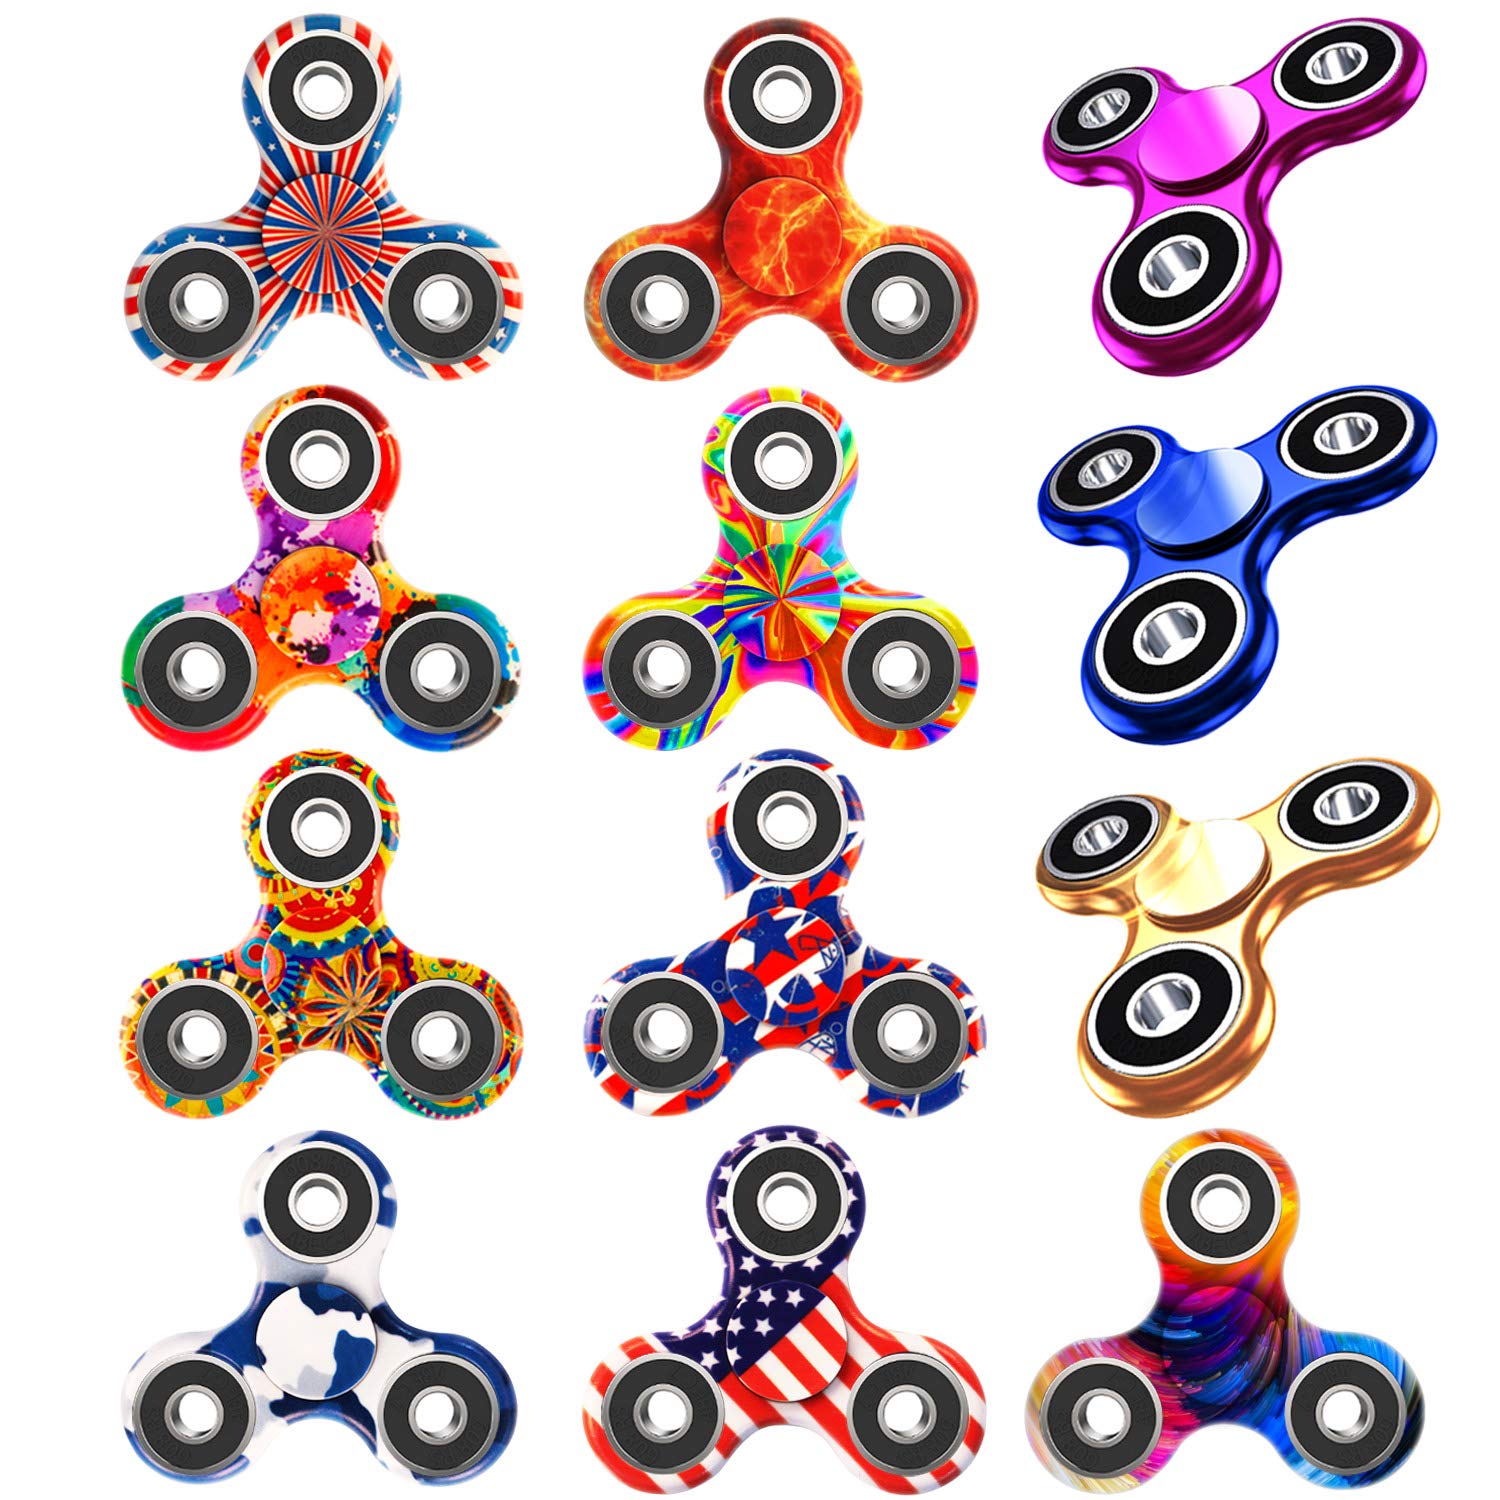 Owen Kyne 12 Pack Fidget Spinner, EDC Hand Tri-Spinner Fidget Stress Relief Toys for Adults and Kids, All-in-one Design 2-3 Min Spins,Relieves Your ADD ADHD Autism